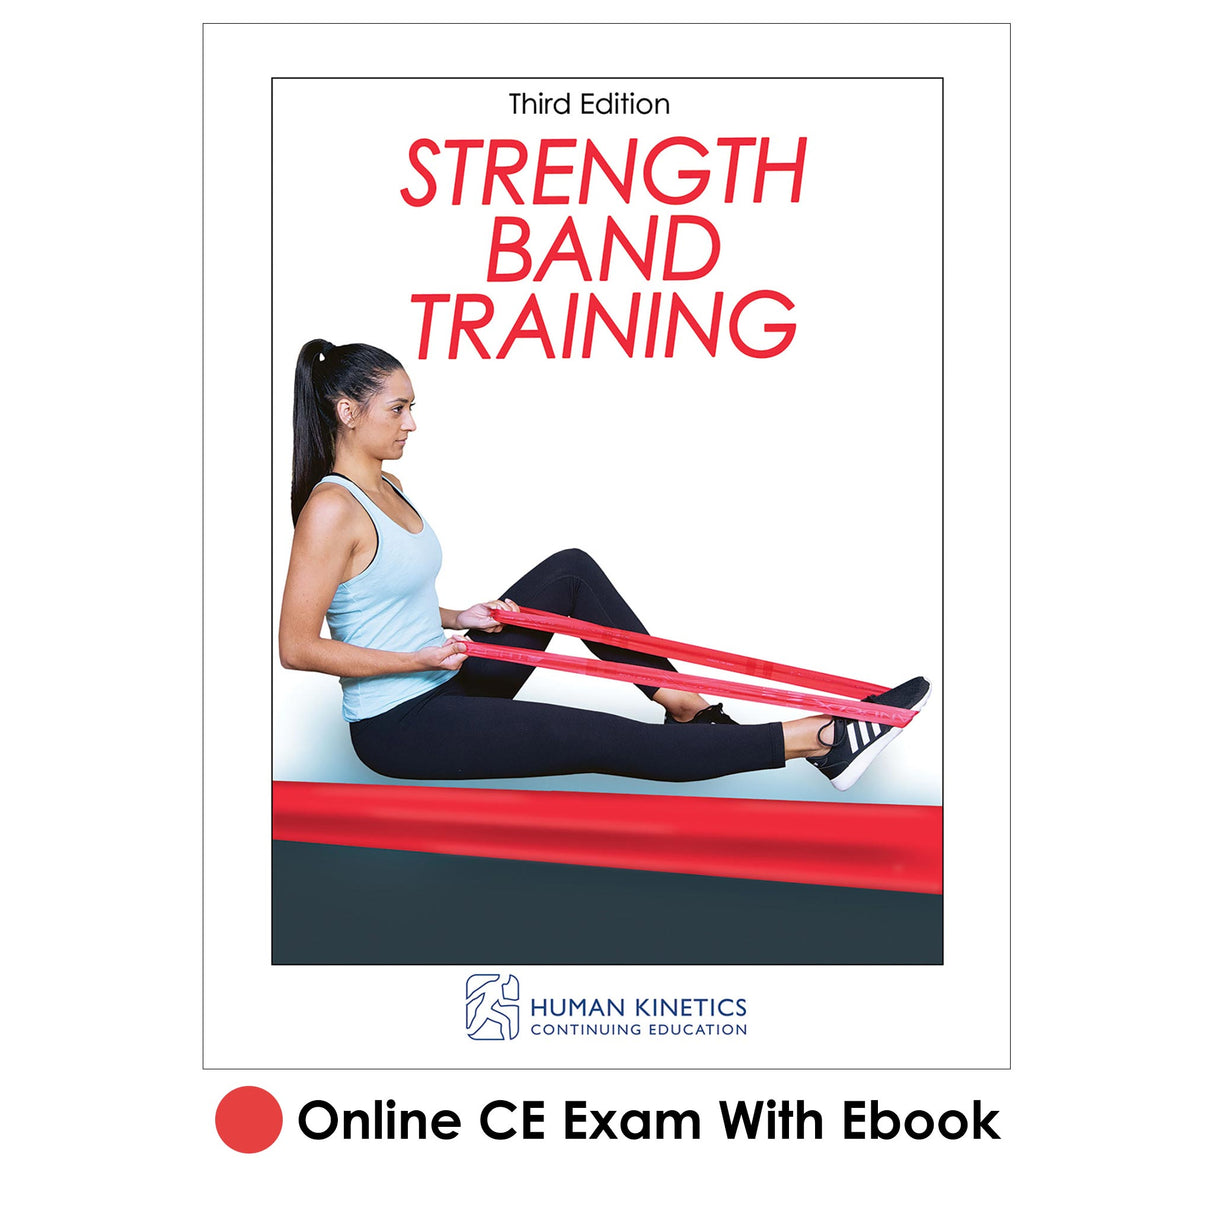 Strength Band Training 3rd Edition Online CE Exam With Ebook